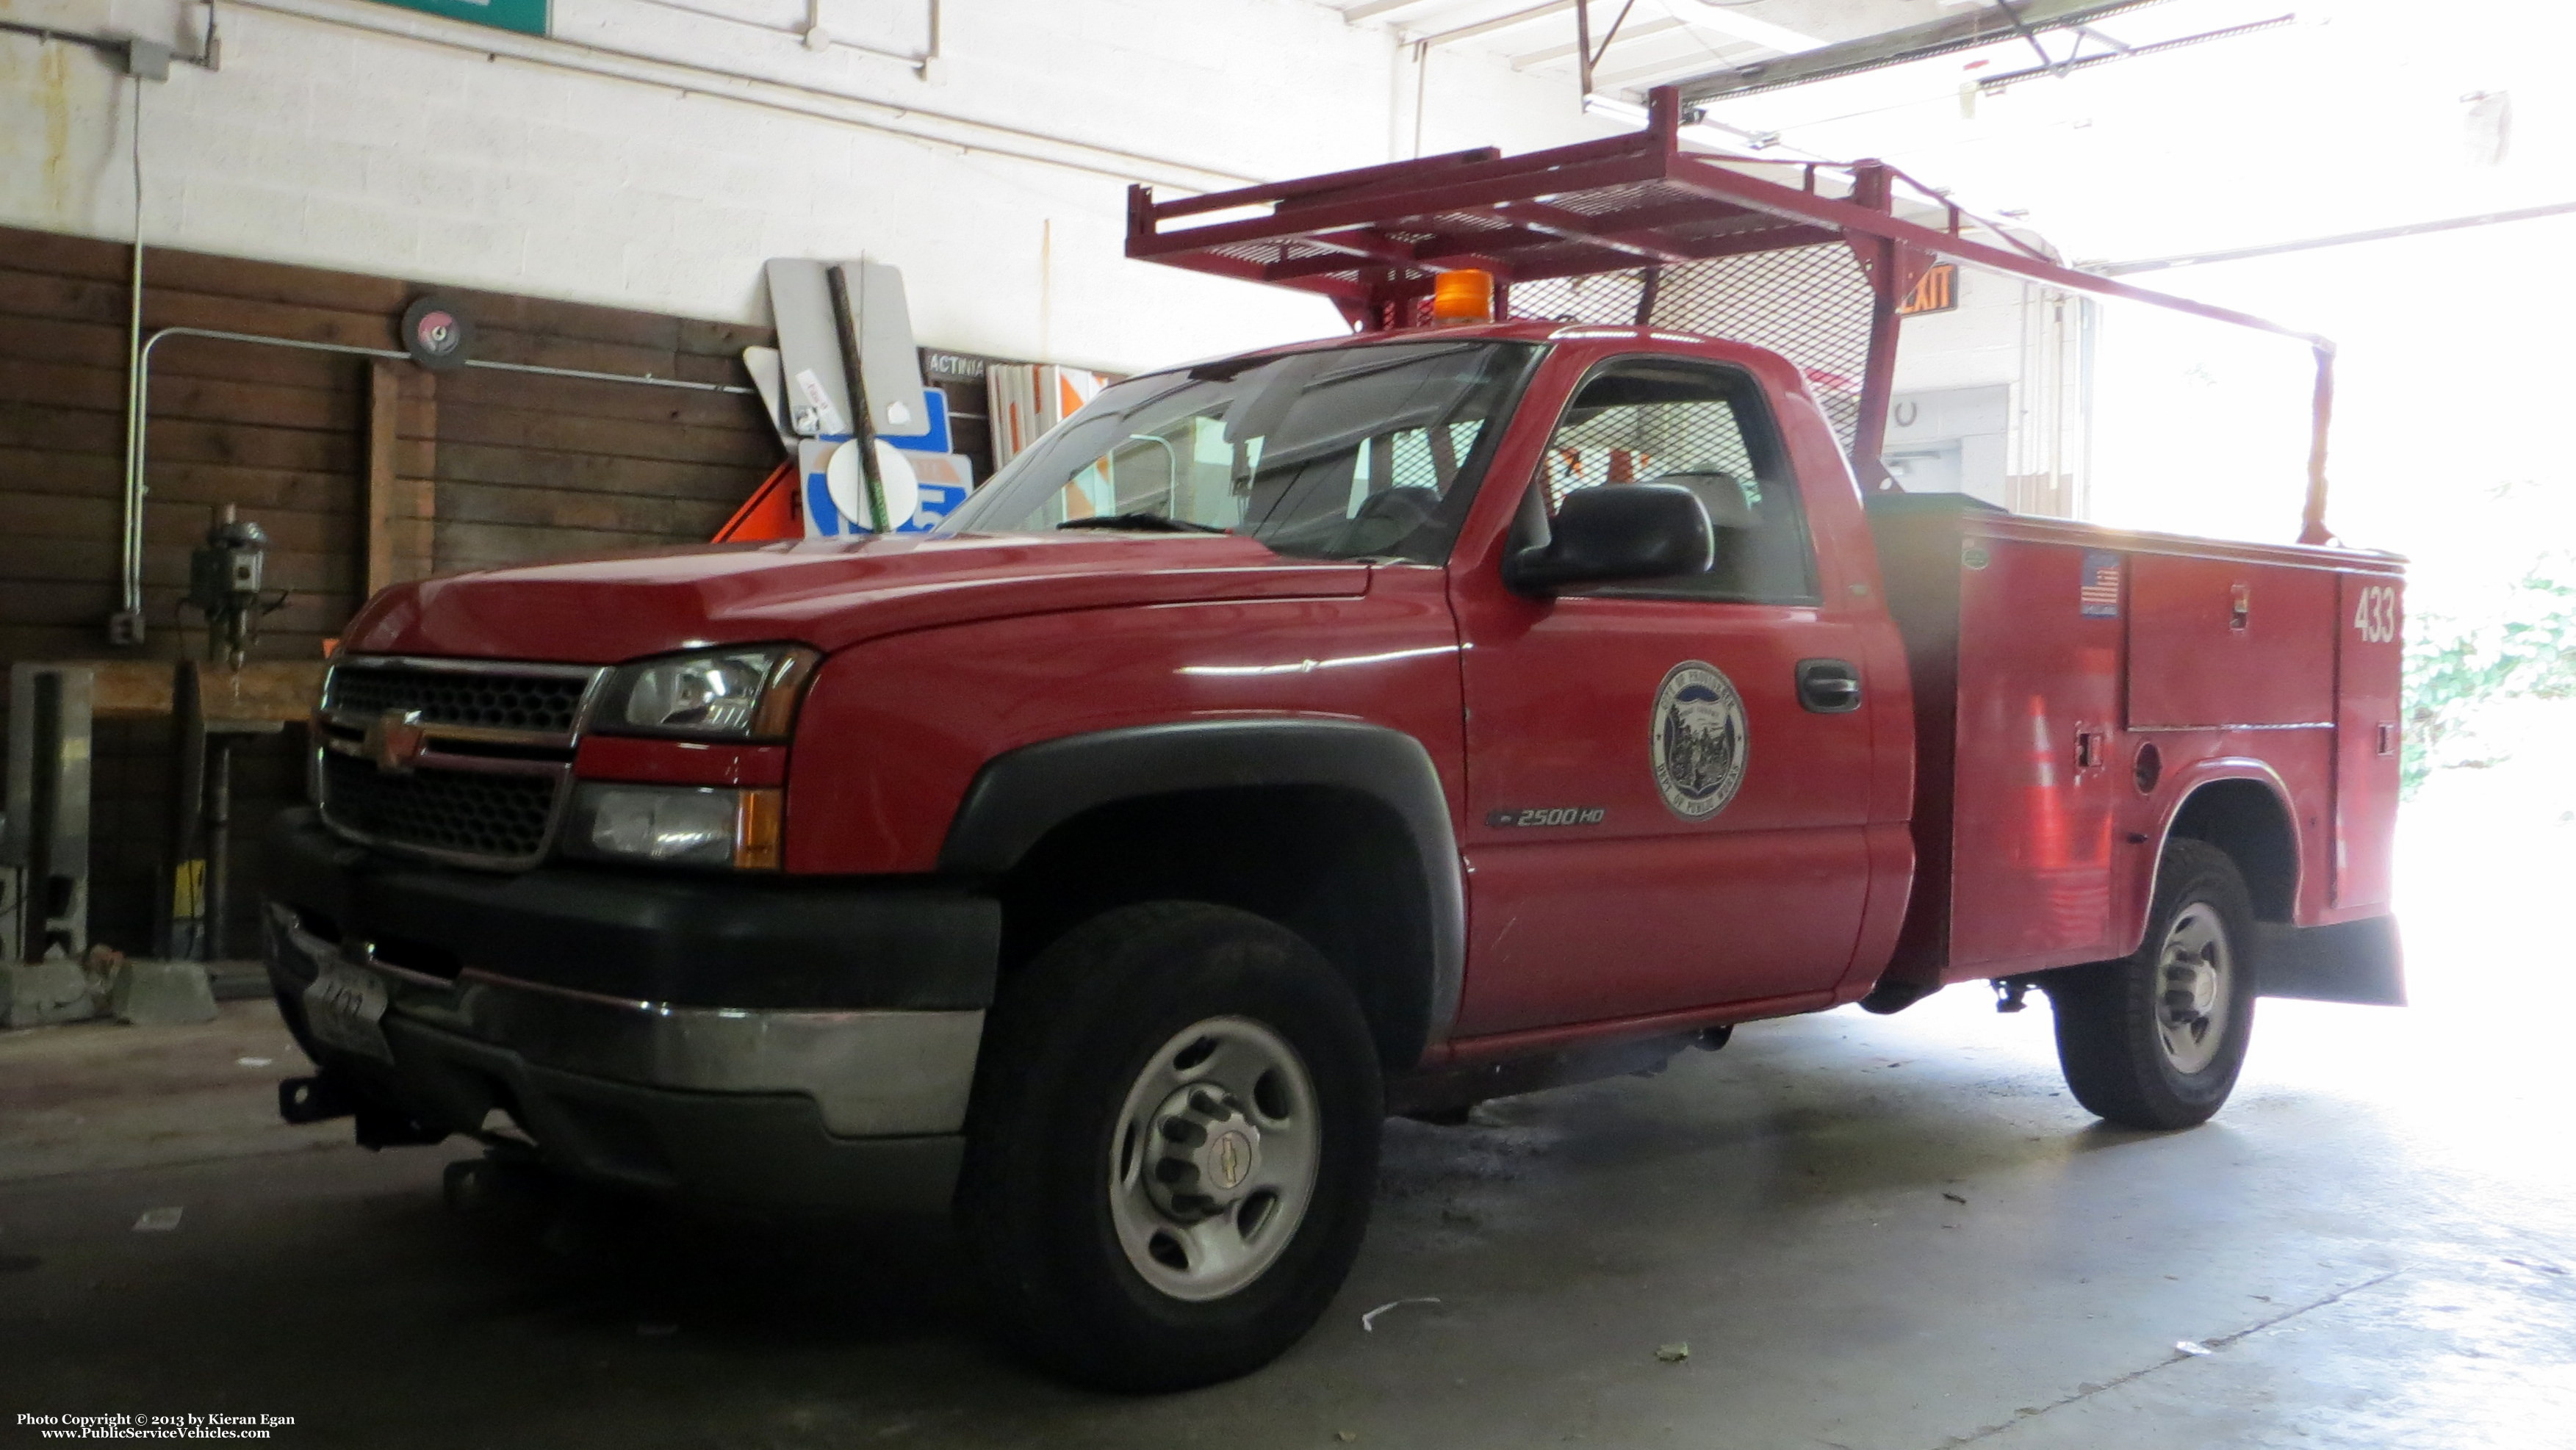 A photo  of Providence Traffic Engineering Division
            Truck 1433, a 1999-2006 Chevrolet 2500HD             taken by Kieran Egan